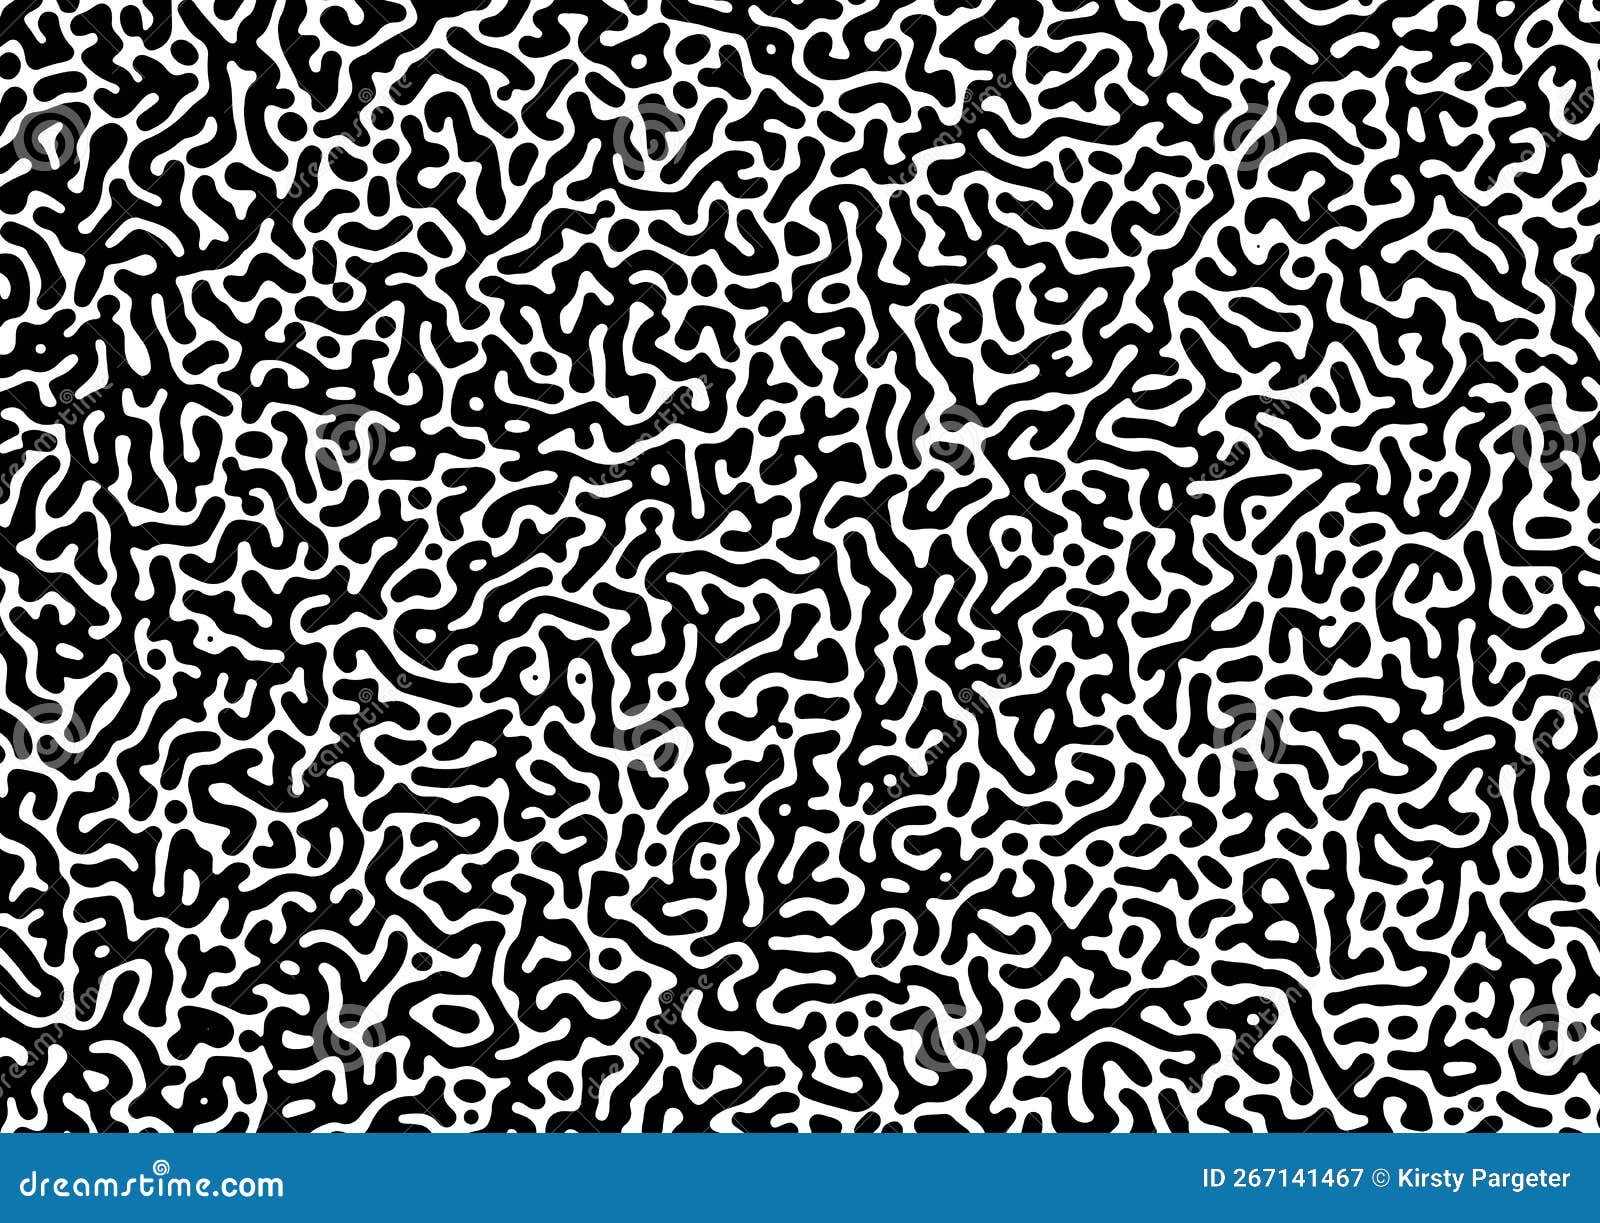 abstract background with organic turing pattern 